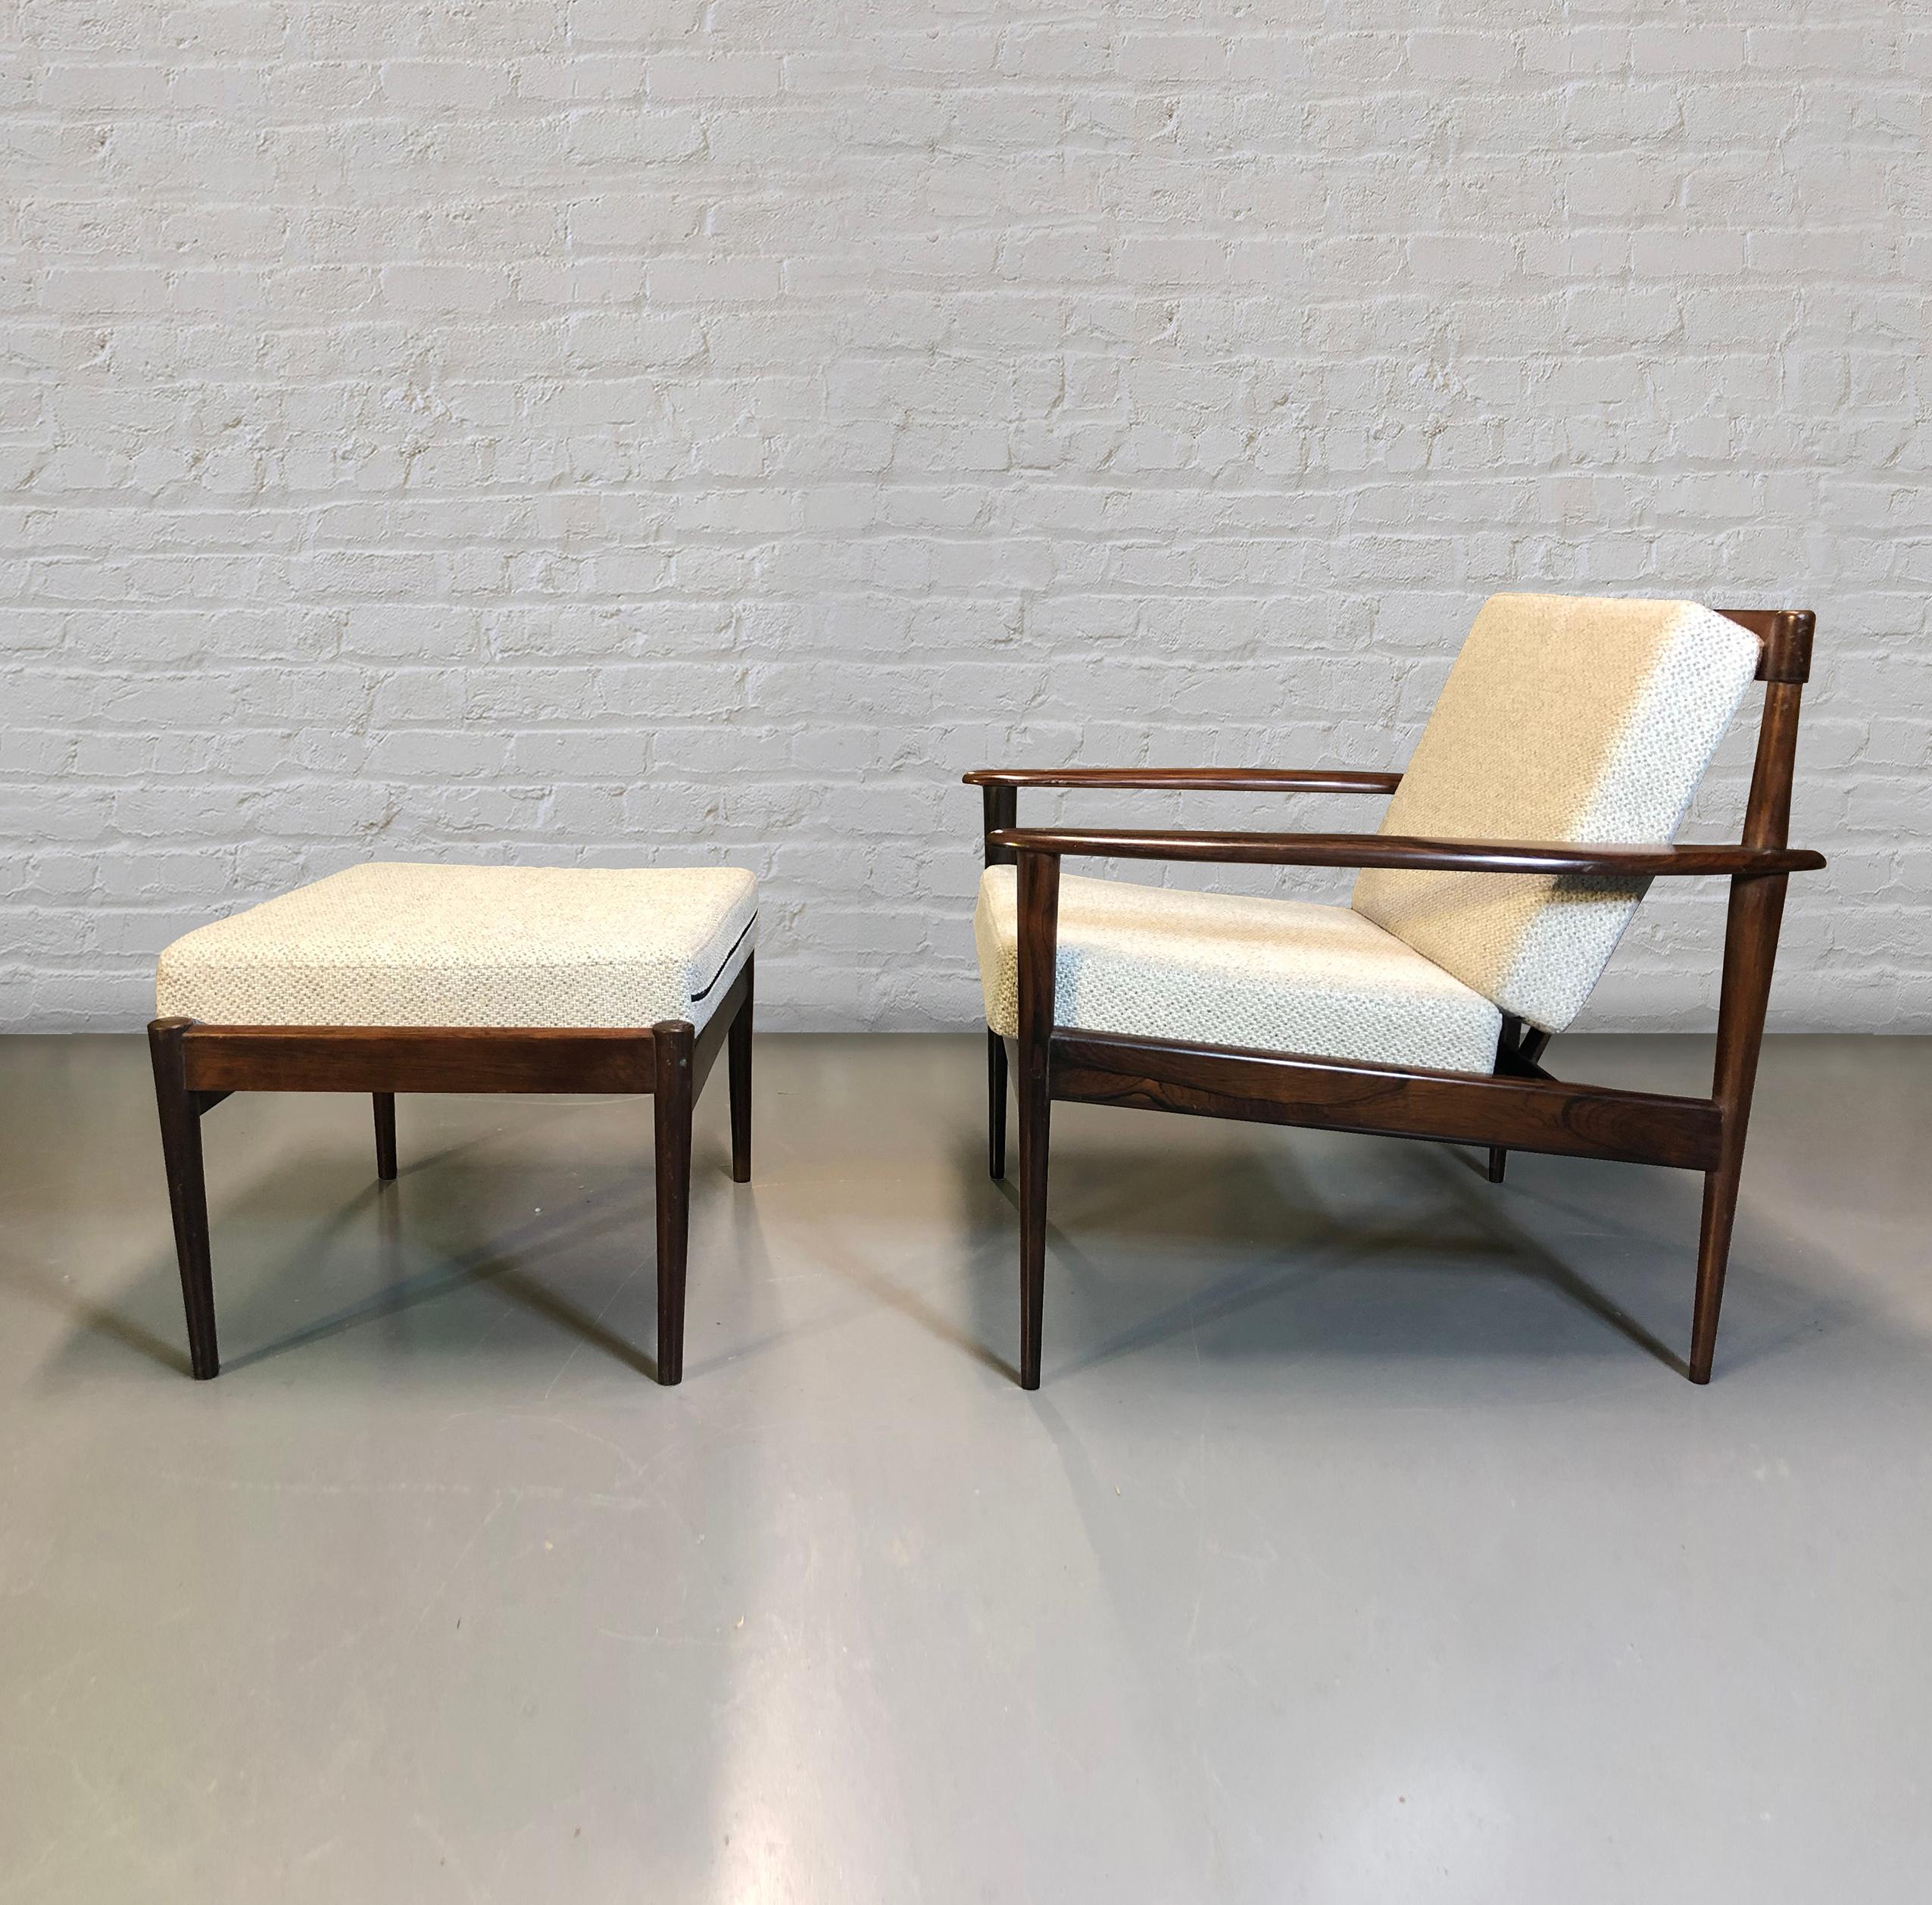 Hand-Crafted Armchair and Ottoman, by Rino Levi, Brazil, 1960s